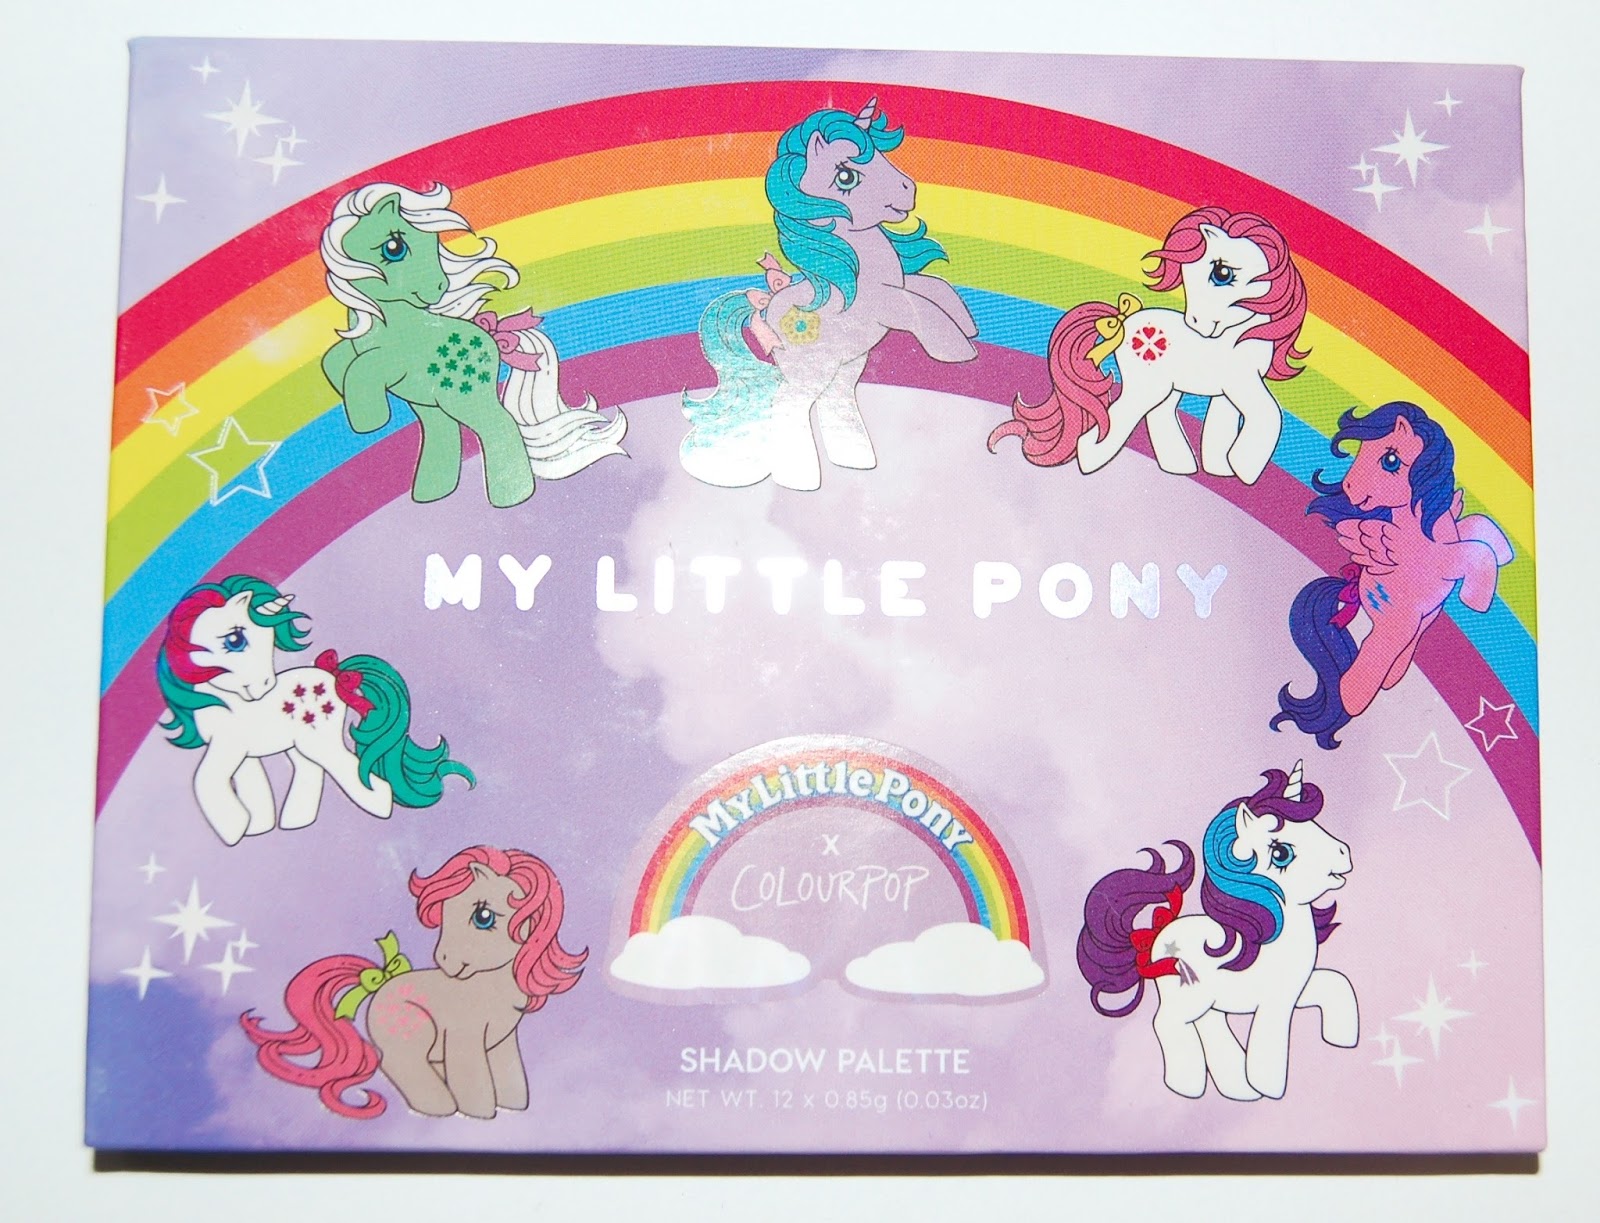 ColourPop X My Little Pony Eyeshadow Palette - Review | The Beauty Isle